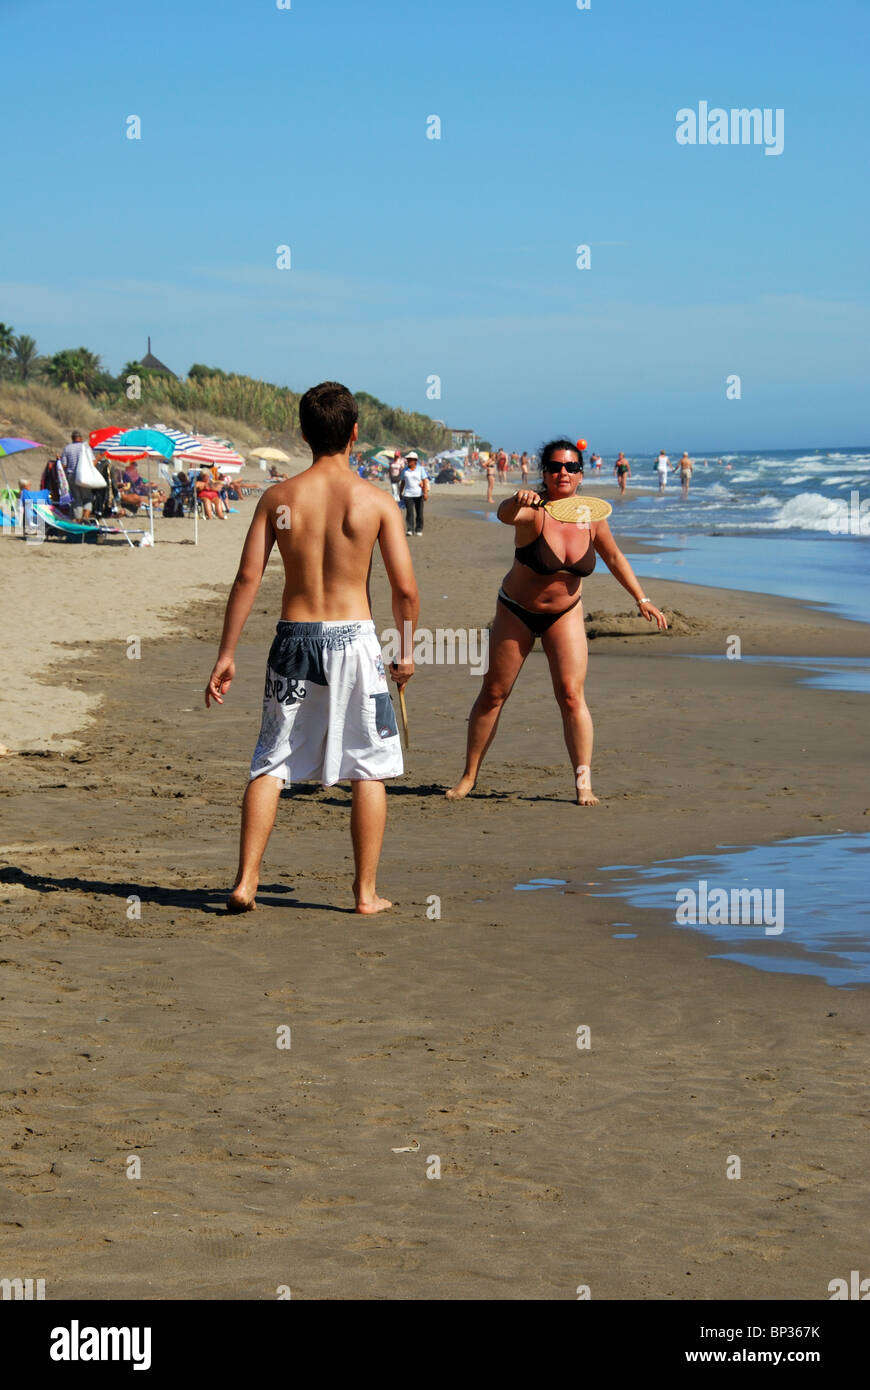 Couple playing a ball game on the beach, Elviria, Marbella, Costa del Sol, Malaga Province, Andalucia, Spain, Western Europe. Stock Photo